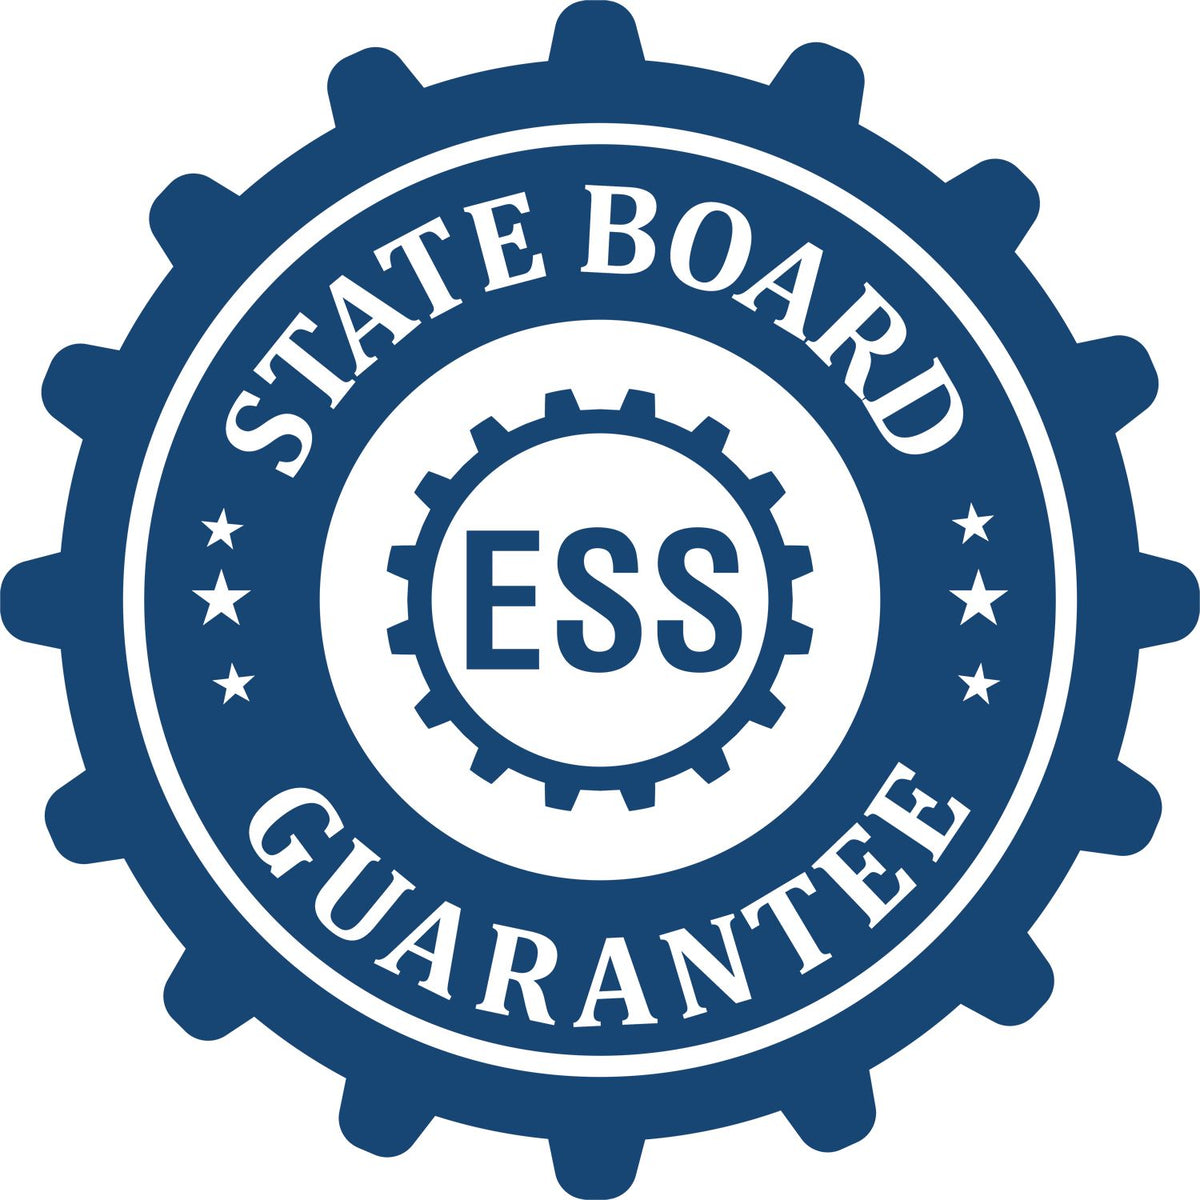 An emblem in a gear shape illustrating a state board guarantee for the Connecticut Professional Engineer Seal Stamp product.